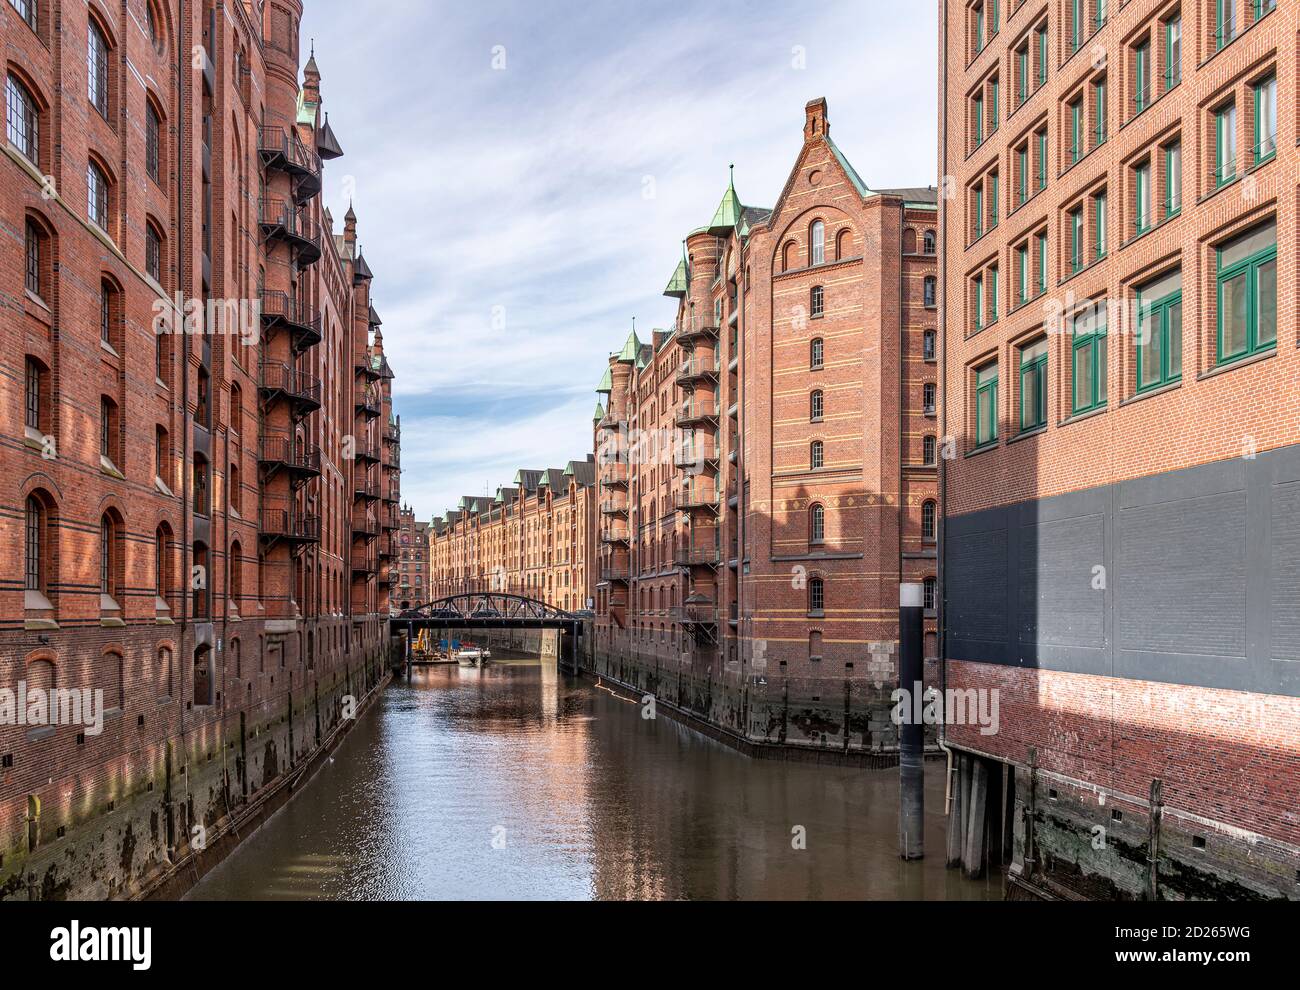 The iconic Speicherstadt (City of Warehouses) in Hamburg, Germany. Located within the HafenCity quarter. Built from 1883 to 1927. Stock Photo